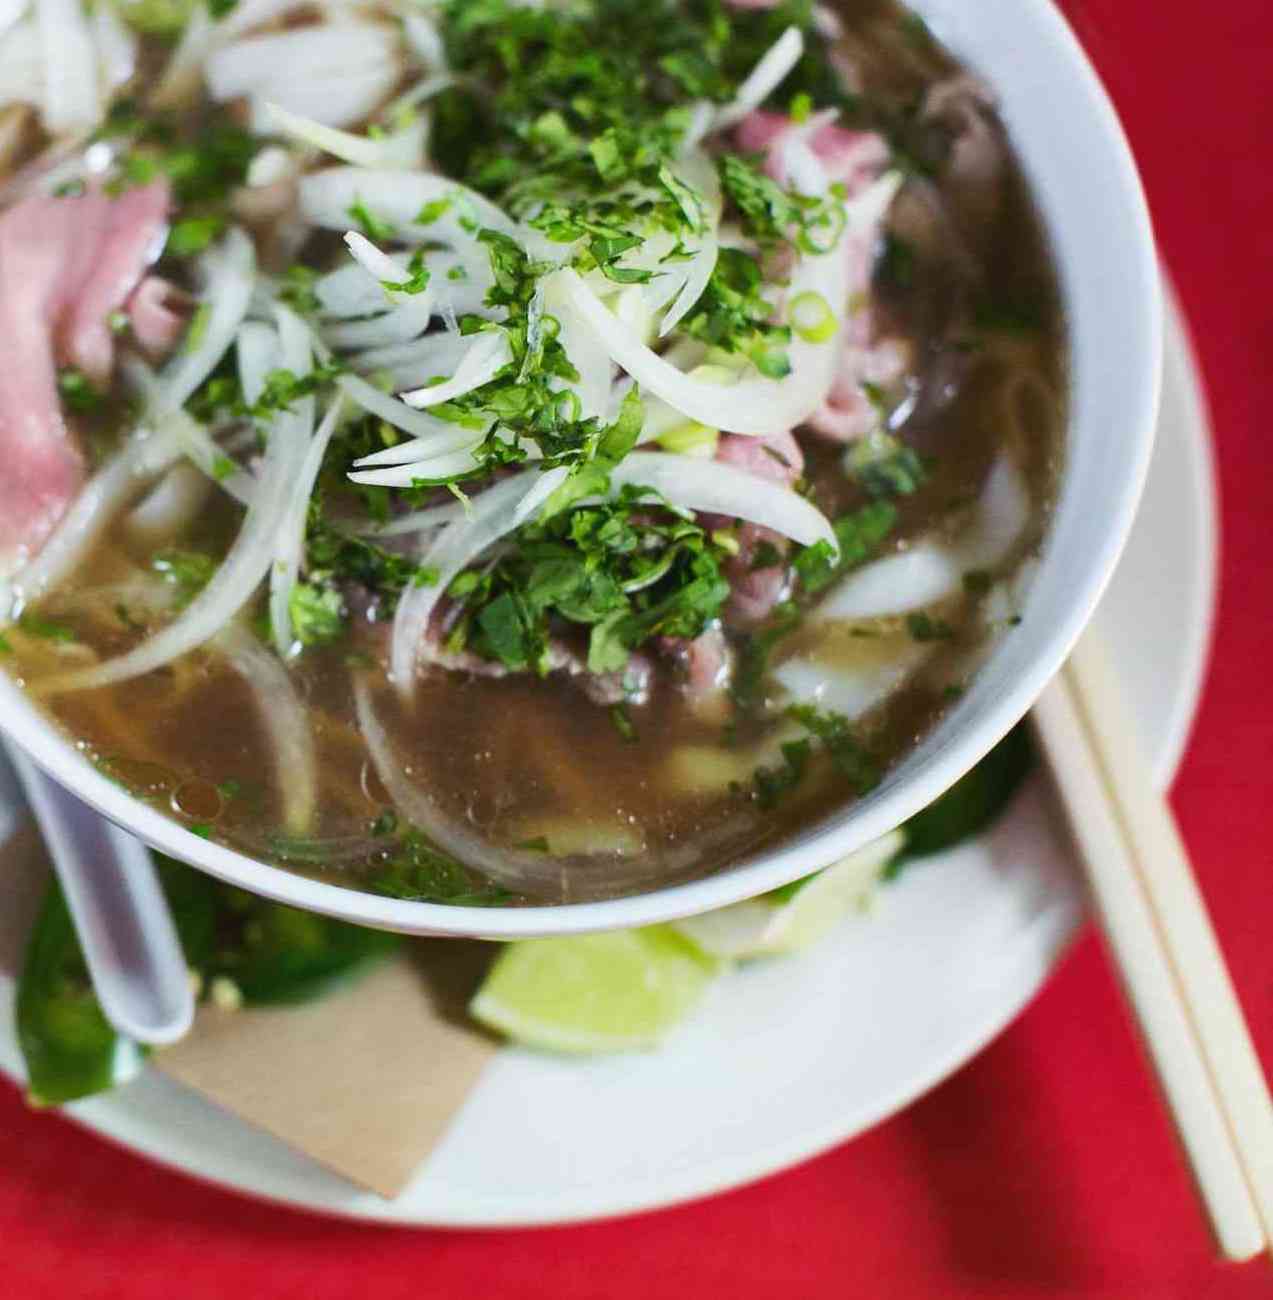 What to comfort an Asian stomach? Pho, Vietnam